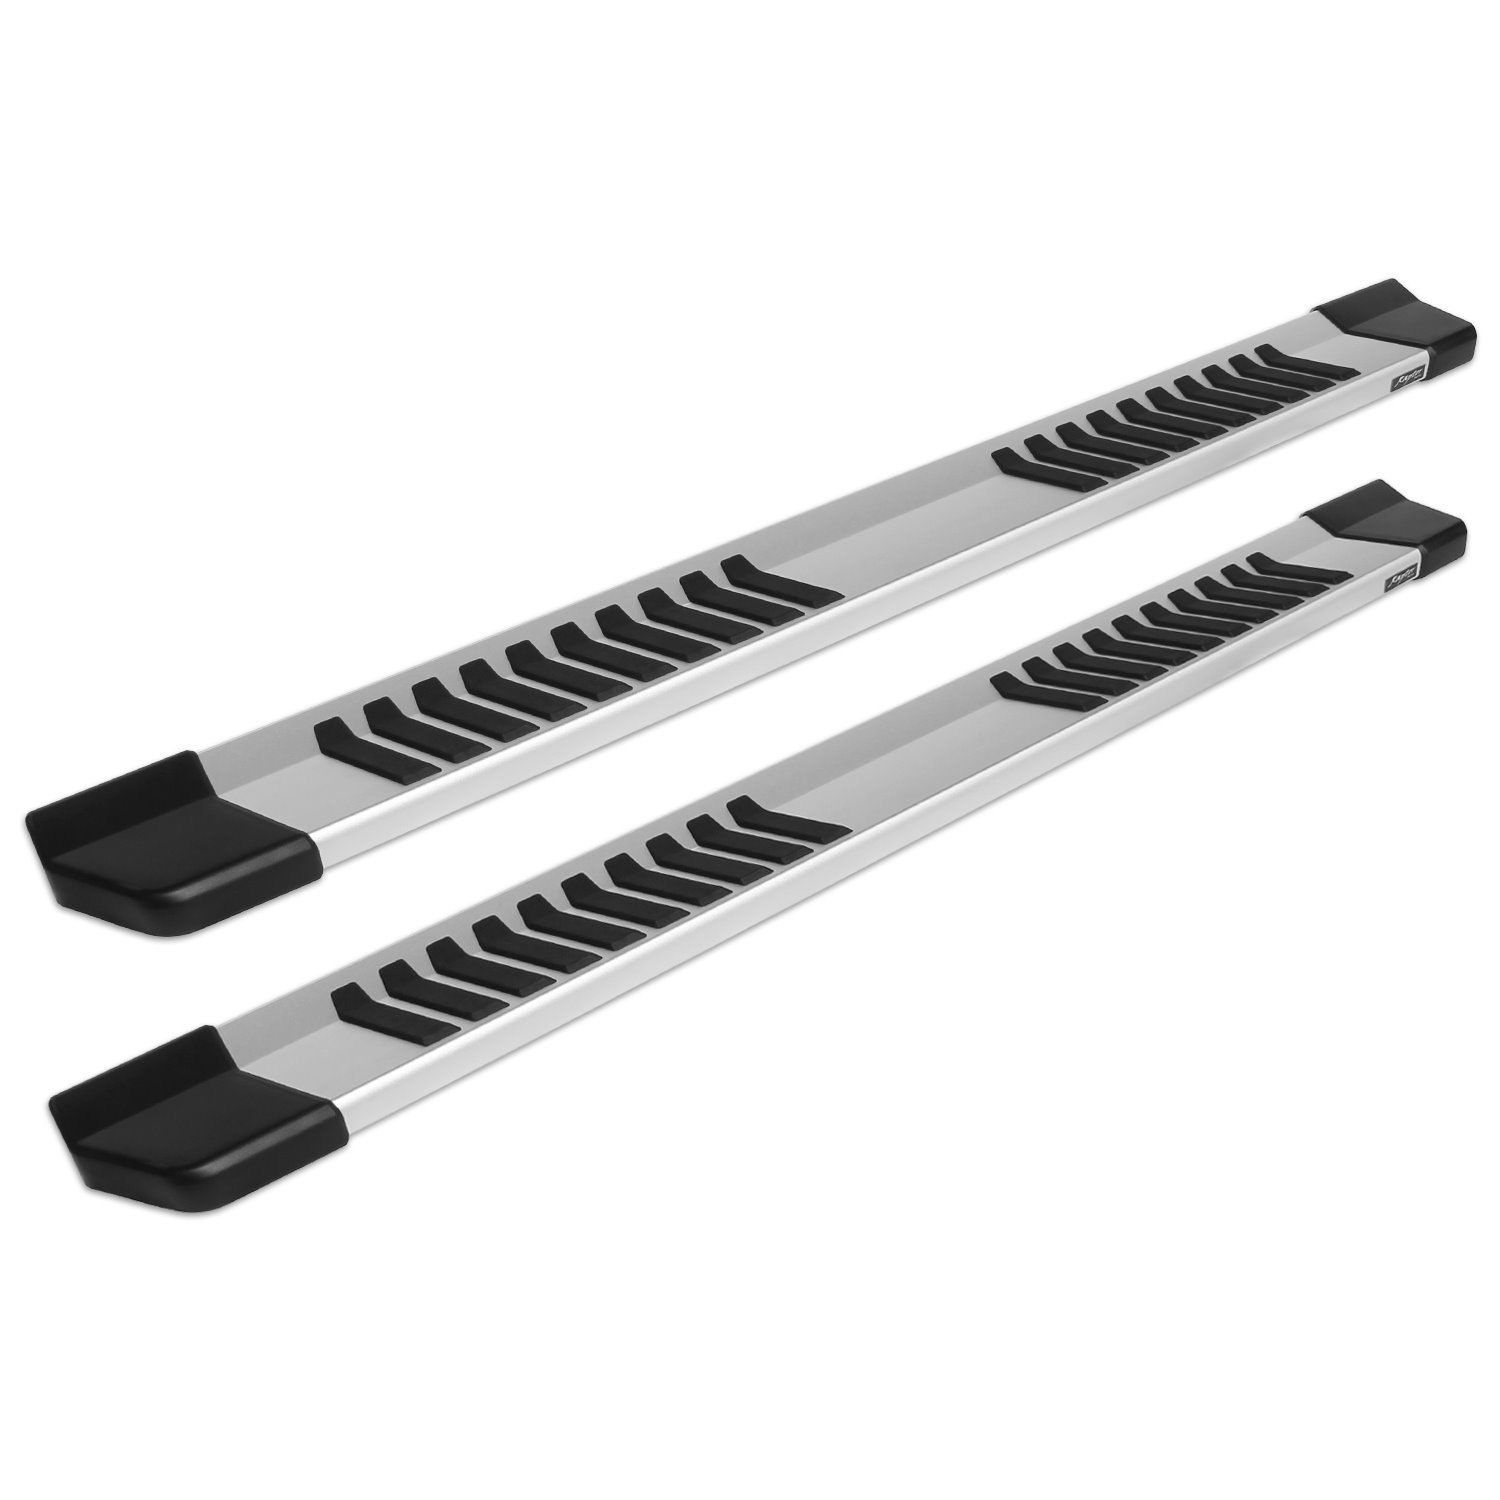 1703-0344 Raptor Series 6 in OEM Style Slide Track Running Boards, Brushed Aluminum, 99-16 Ford F-250/F-350 Super Duty Crew Cab